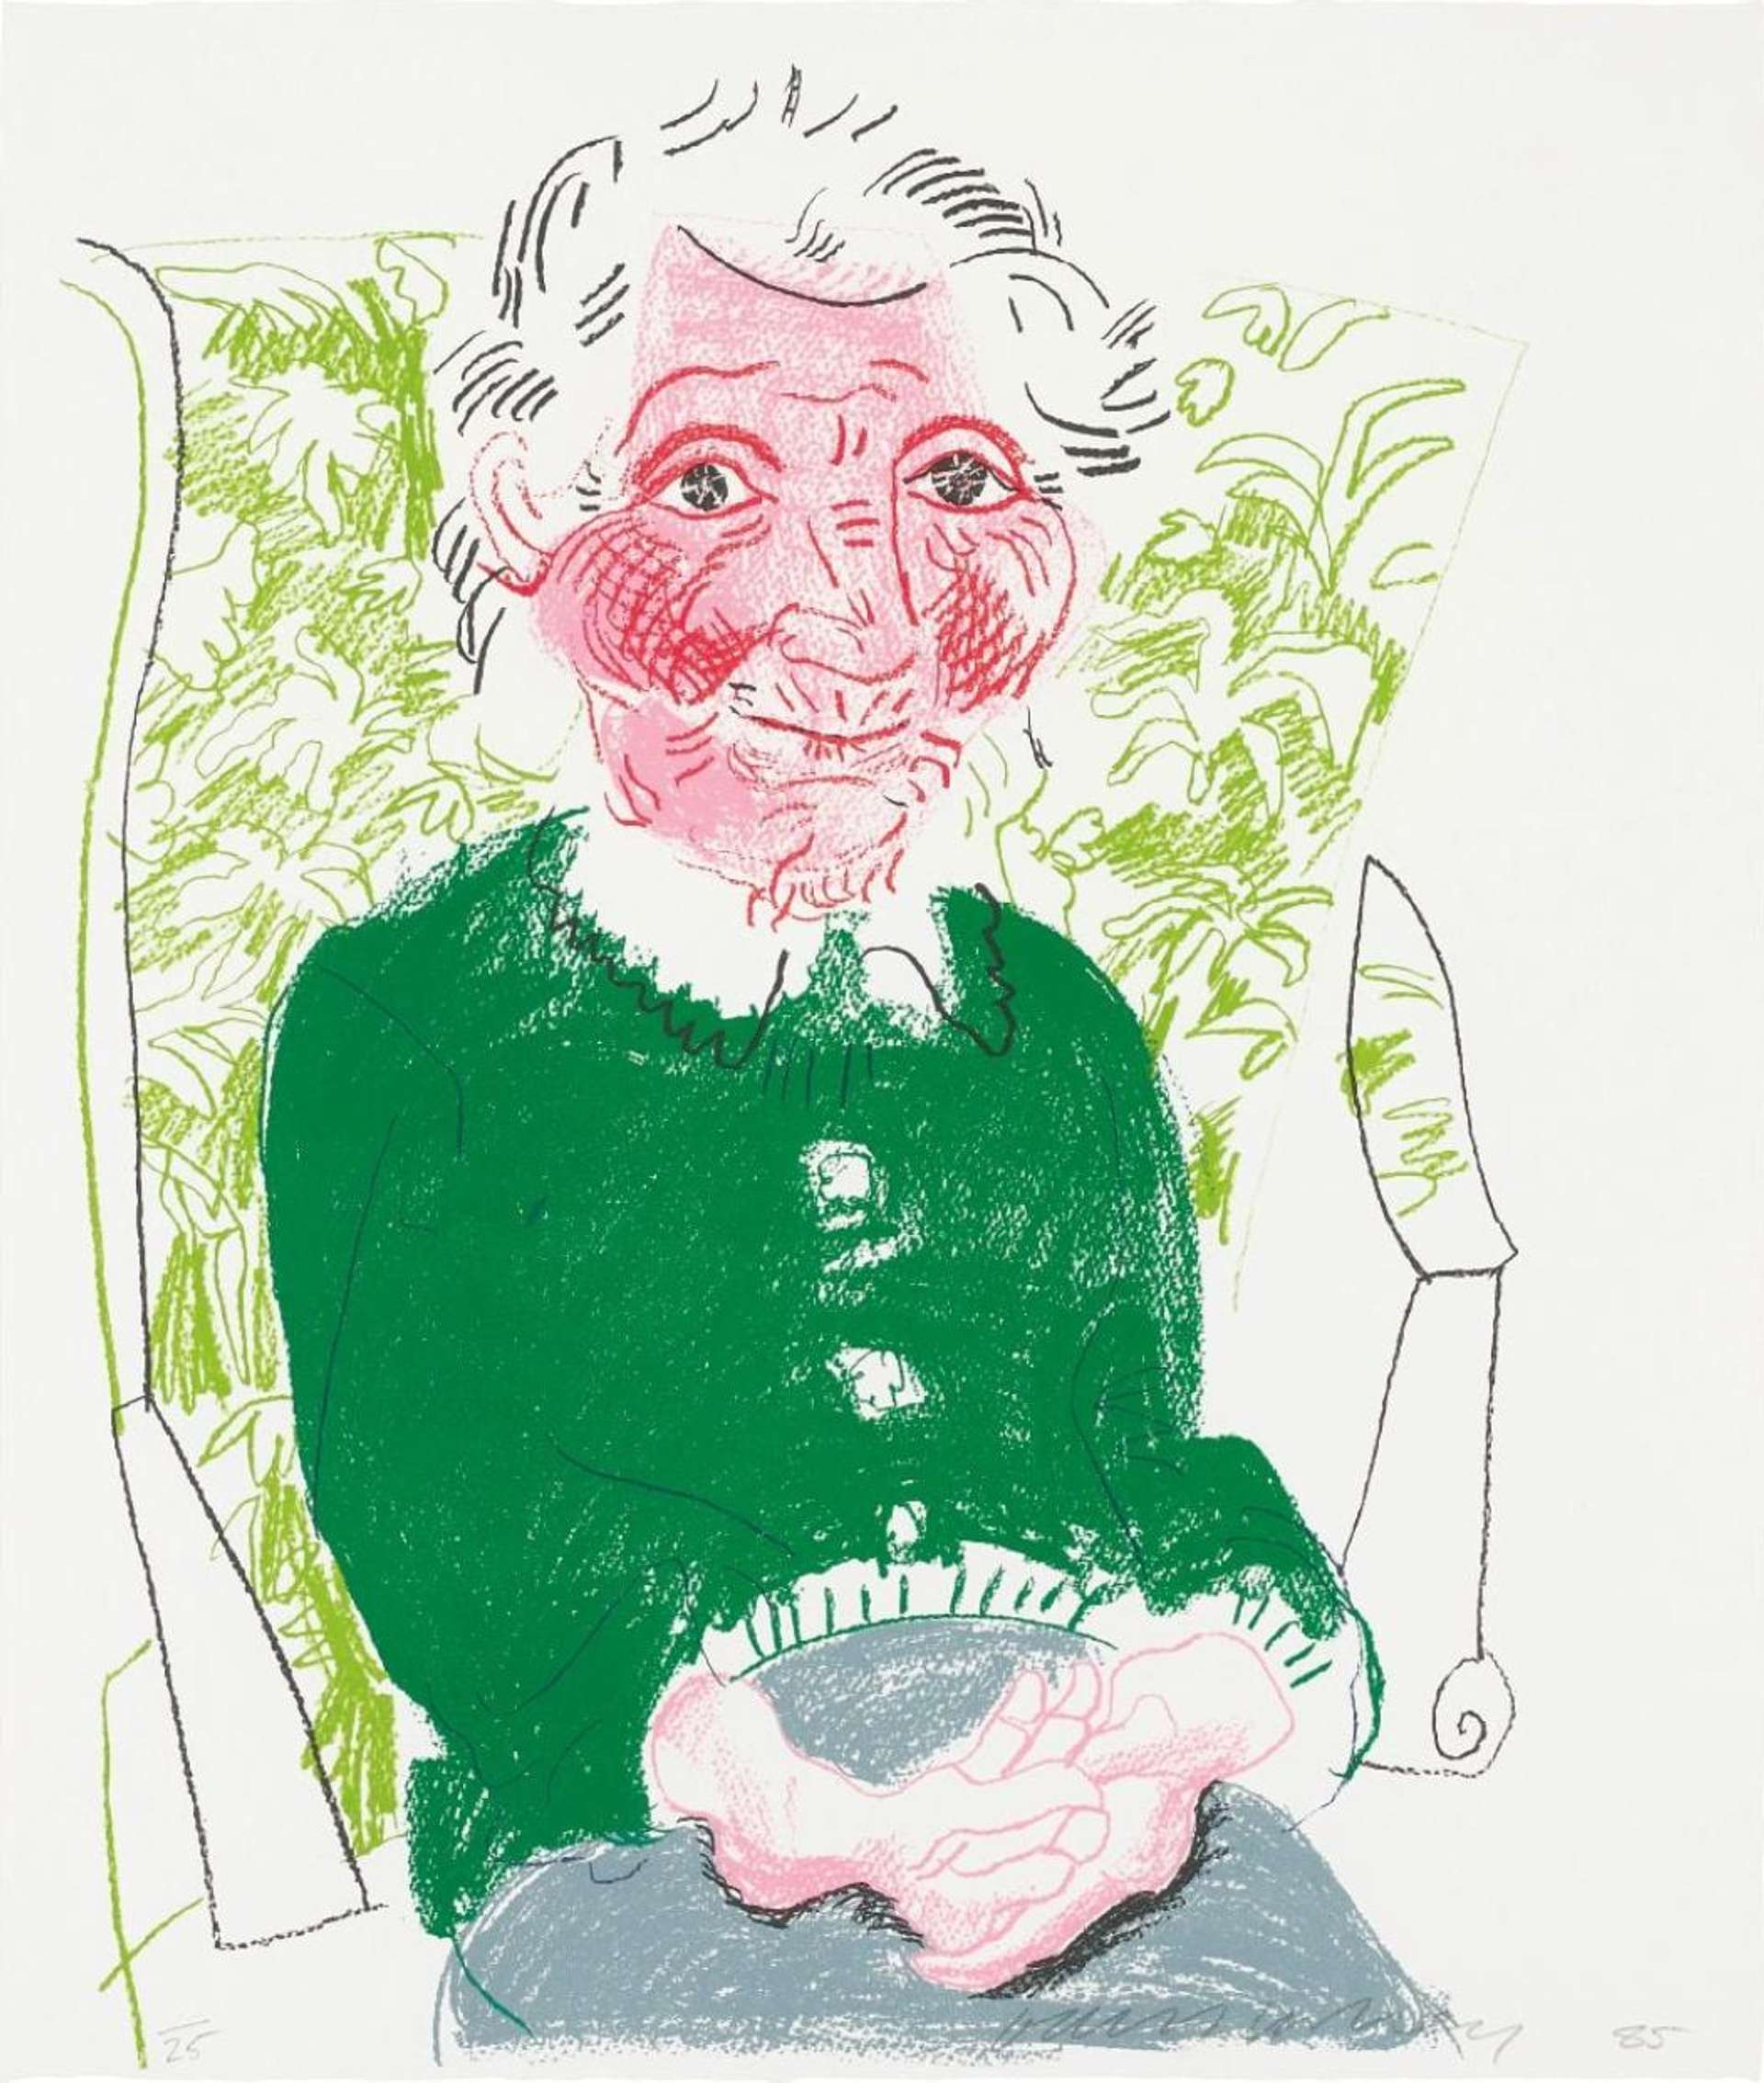 David Hockney's Portrait Of Mother I. A lithographic print of an elderly woman with bright red cheeks, wearing a green sweater while seated in a green patterned chair.